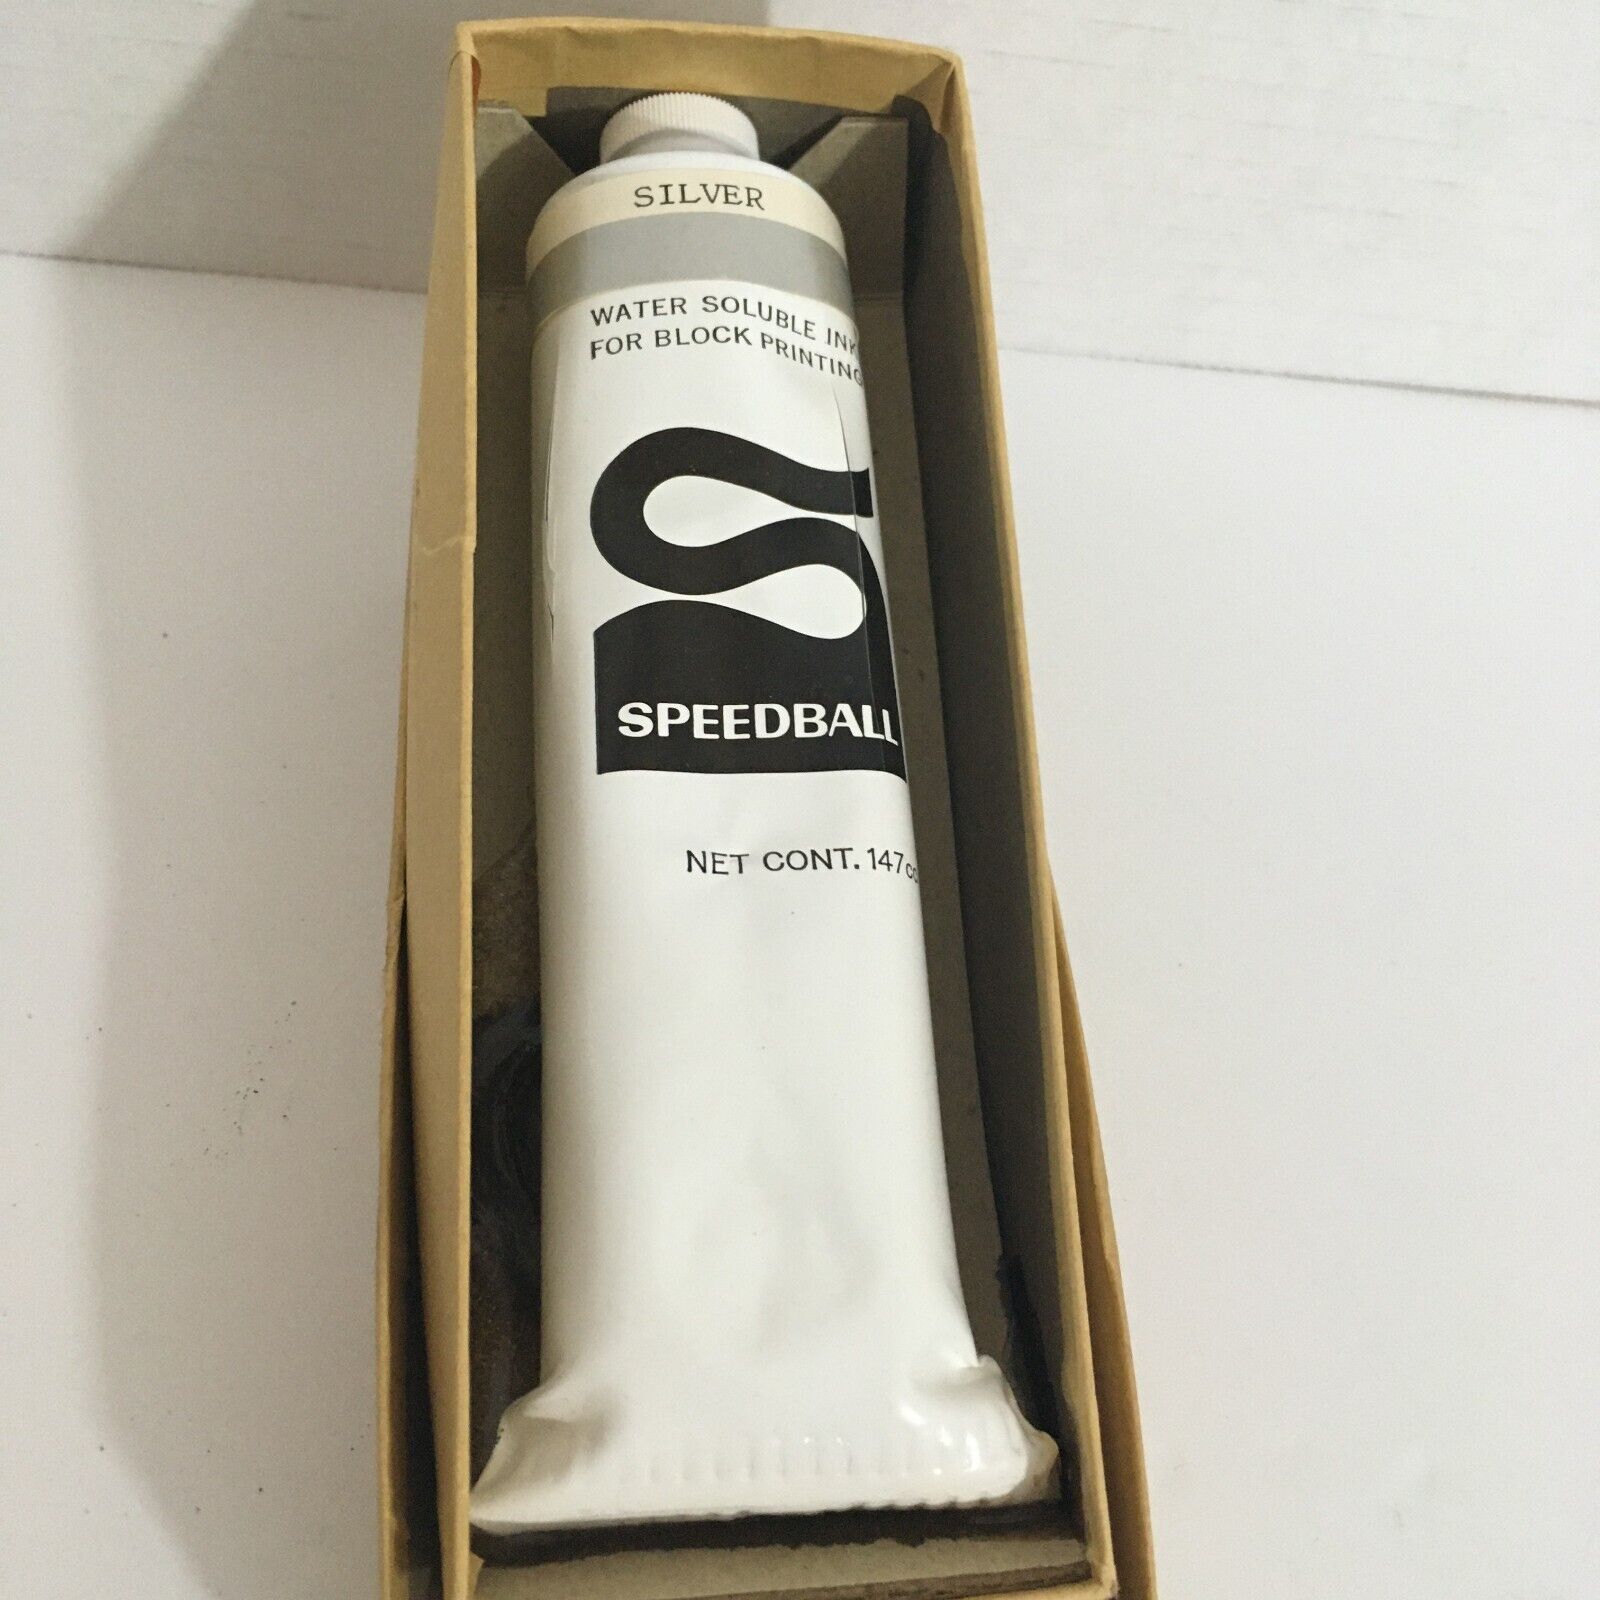 Block Printing Ink Water-soluble Speedball 147 Cc Tube Silver #3614